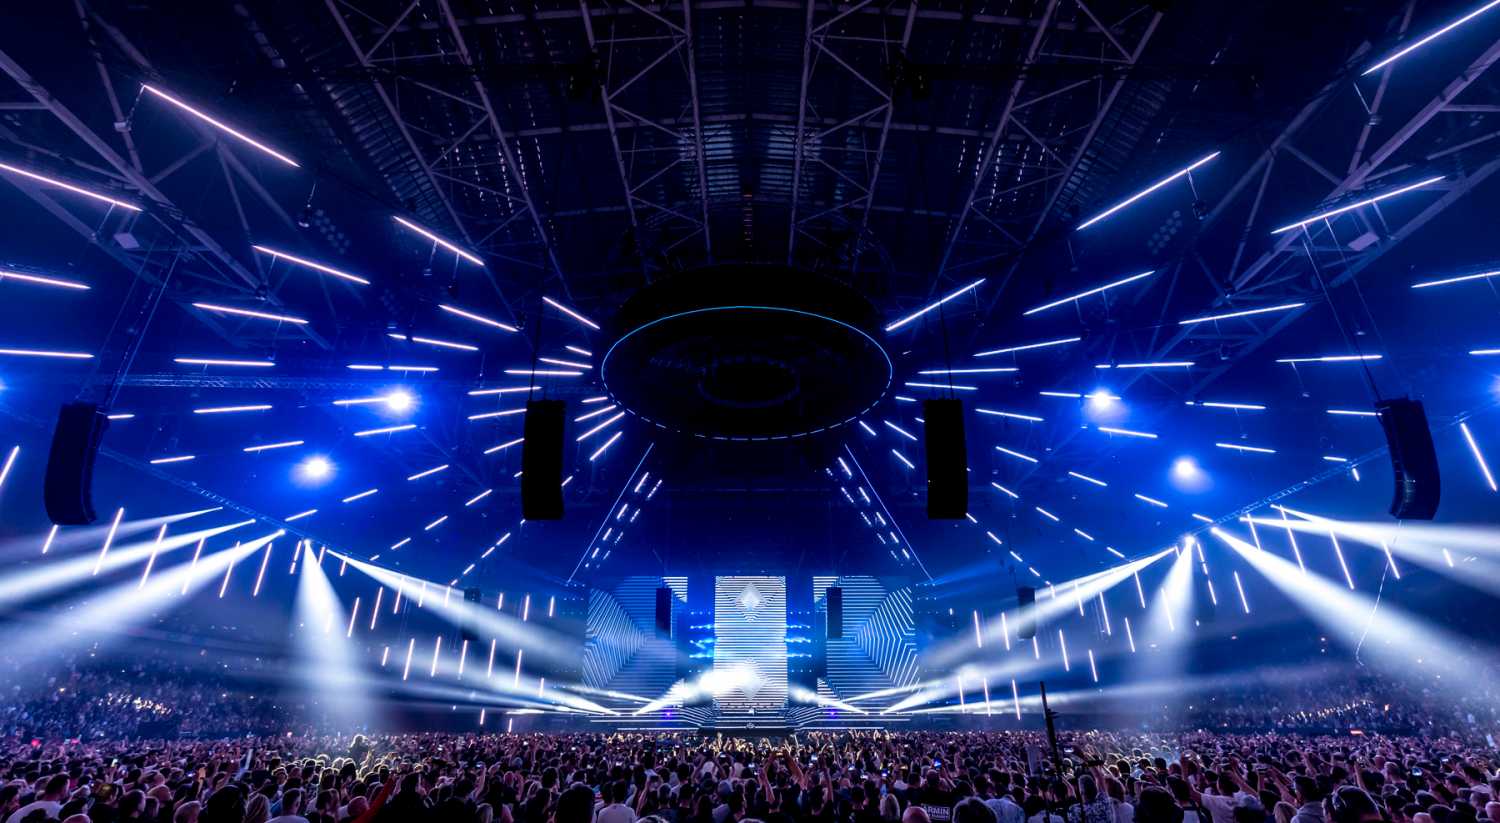 Armin van Buuren became the first DJ to stage a solo show at the famous venue